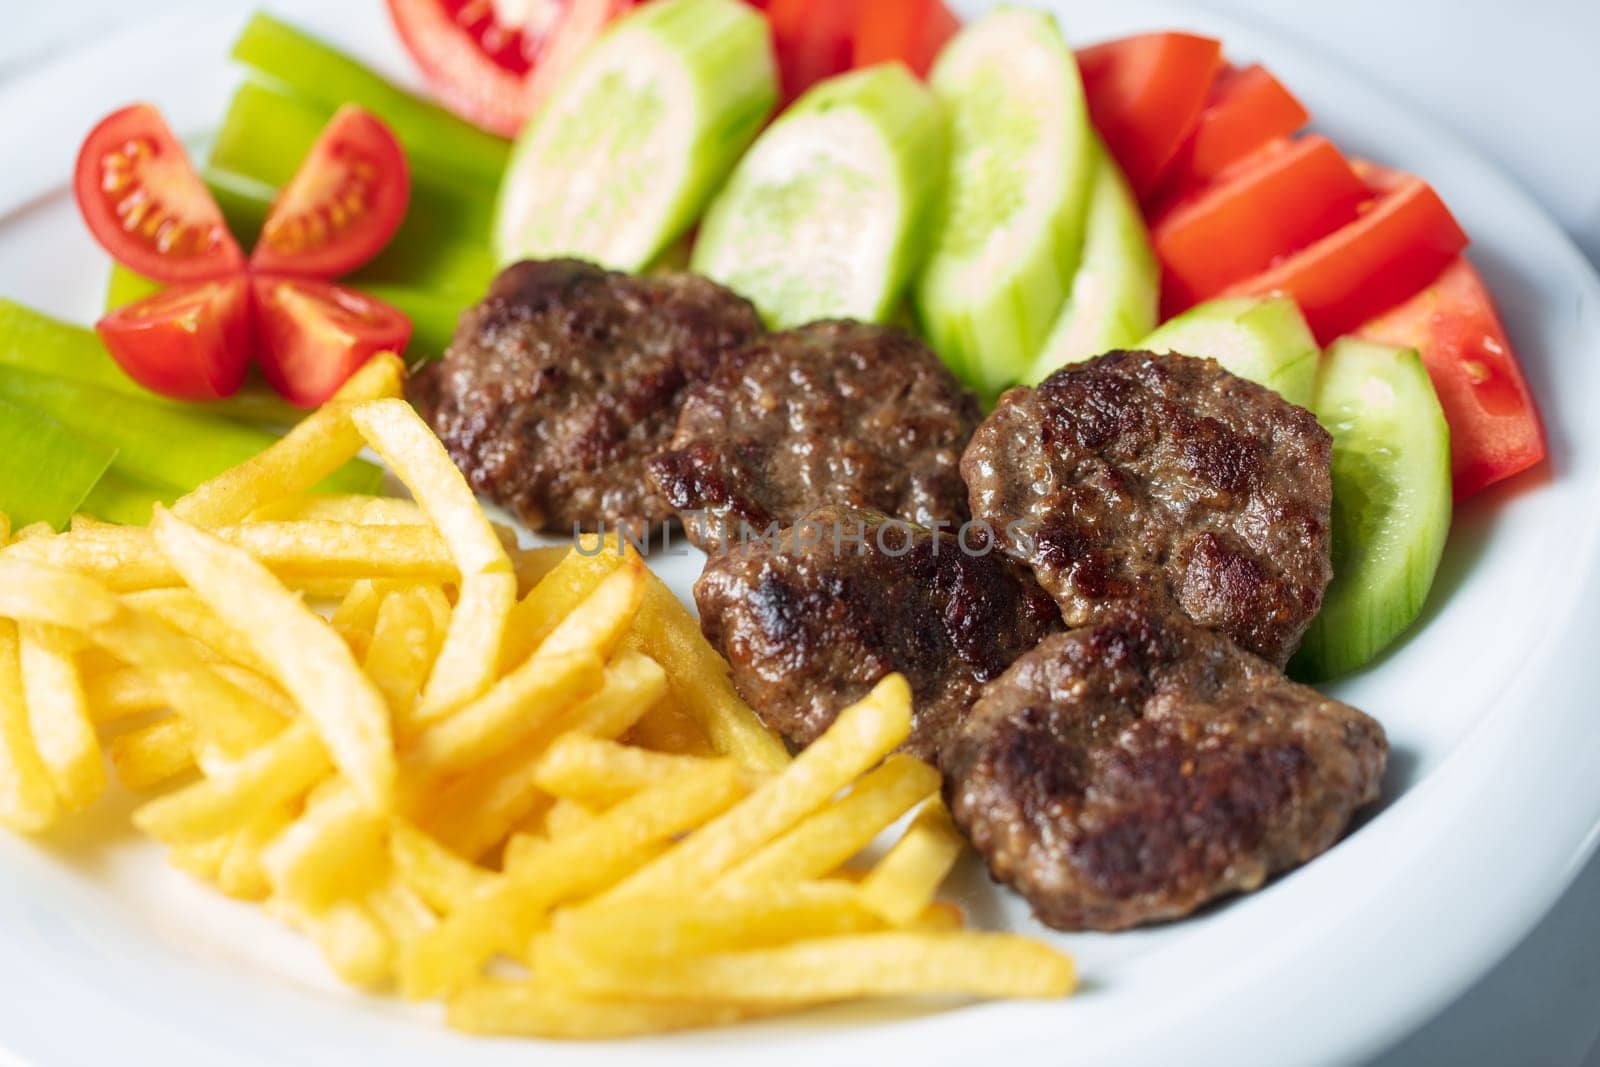 Traditional Turkish meatballs served with French fries tomatoes . High quality photo